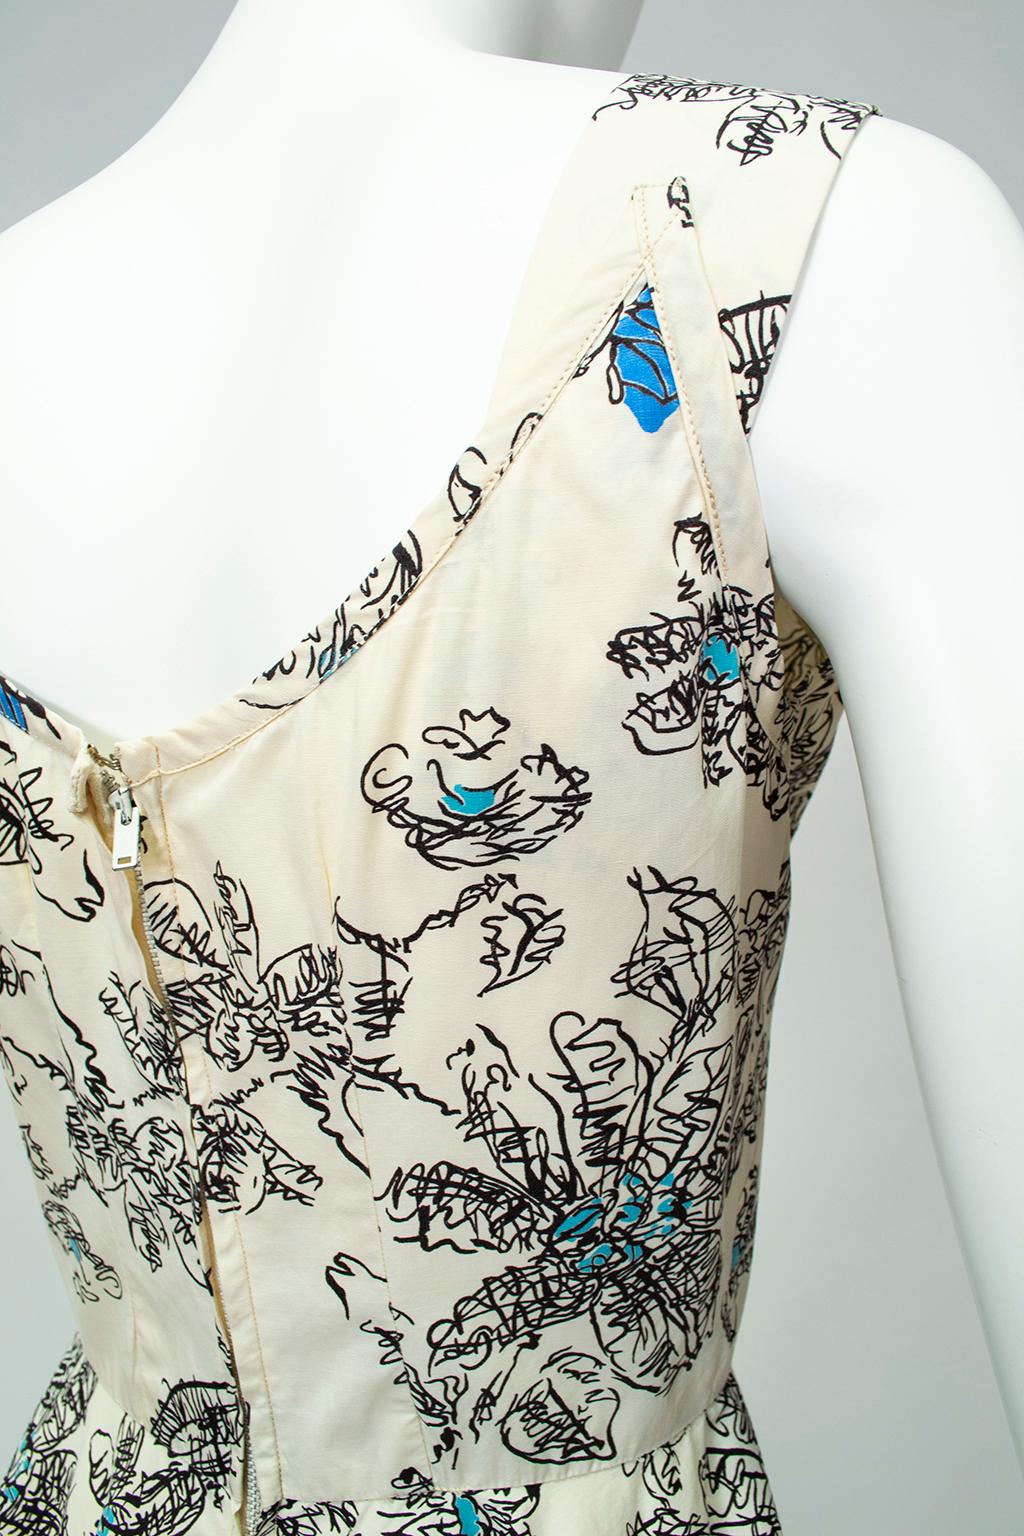 Blue Butterfly Sketch New Look Ballerina Sundress with Bib Points - XS, 1950s For Sale 2